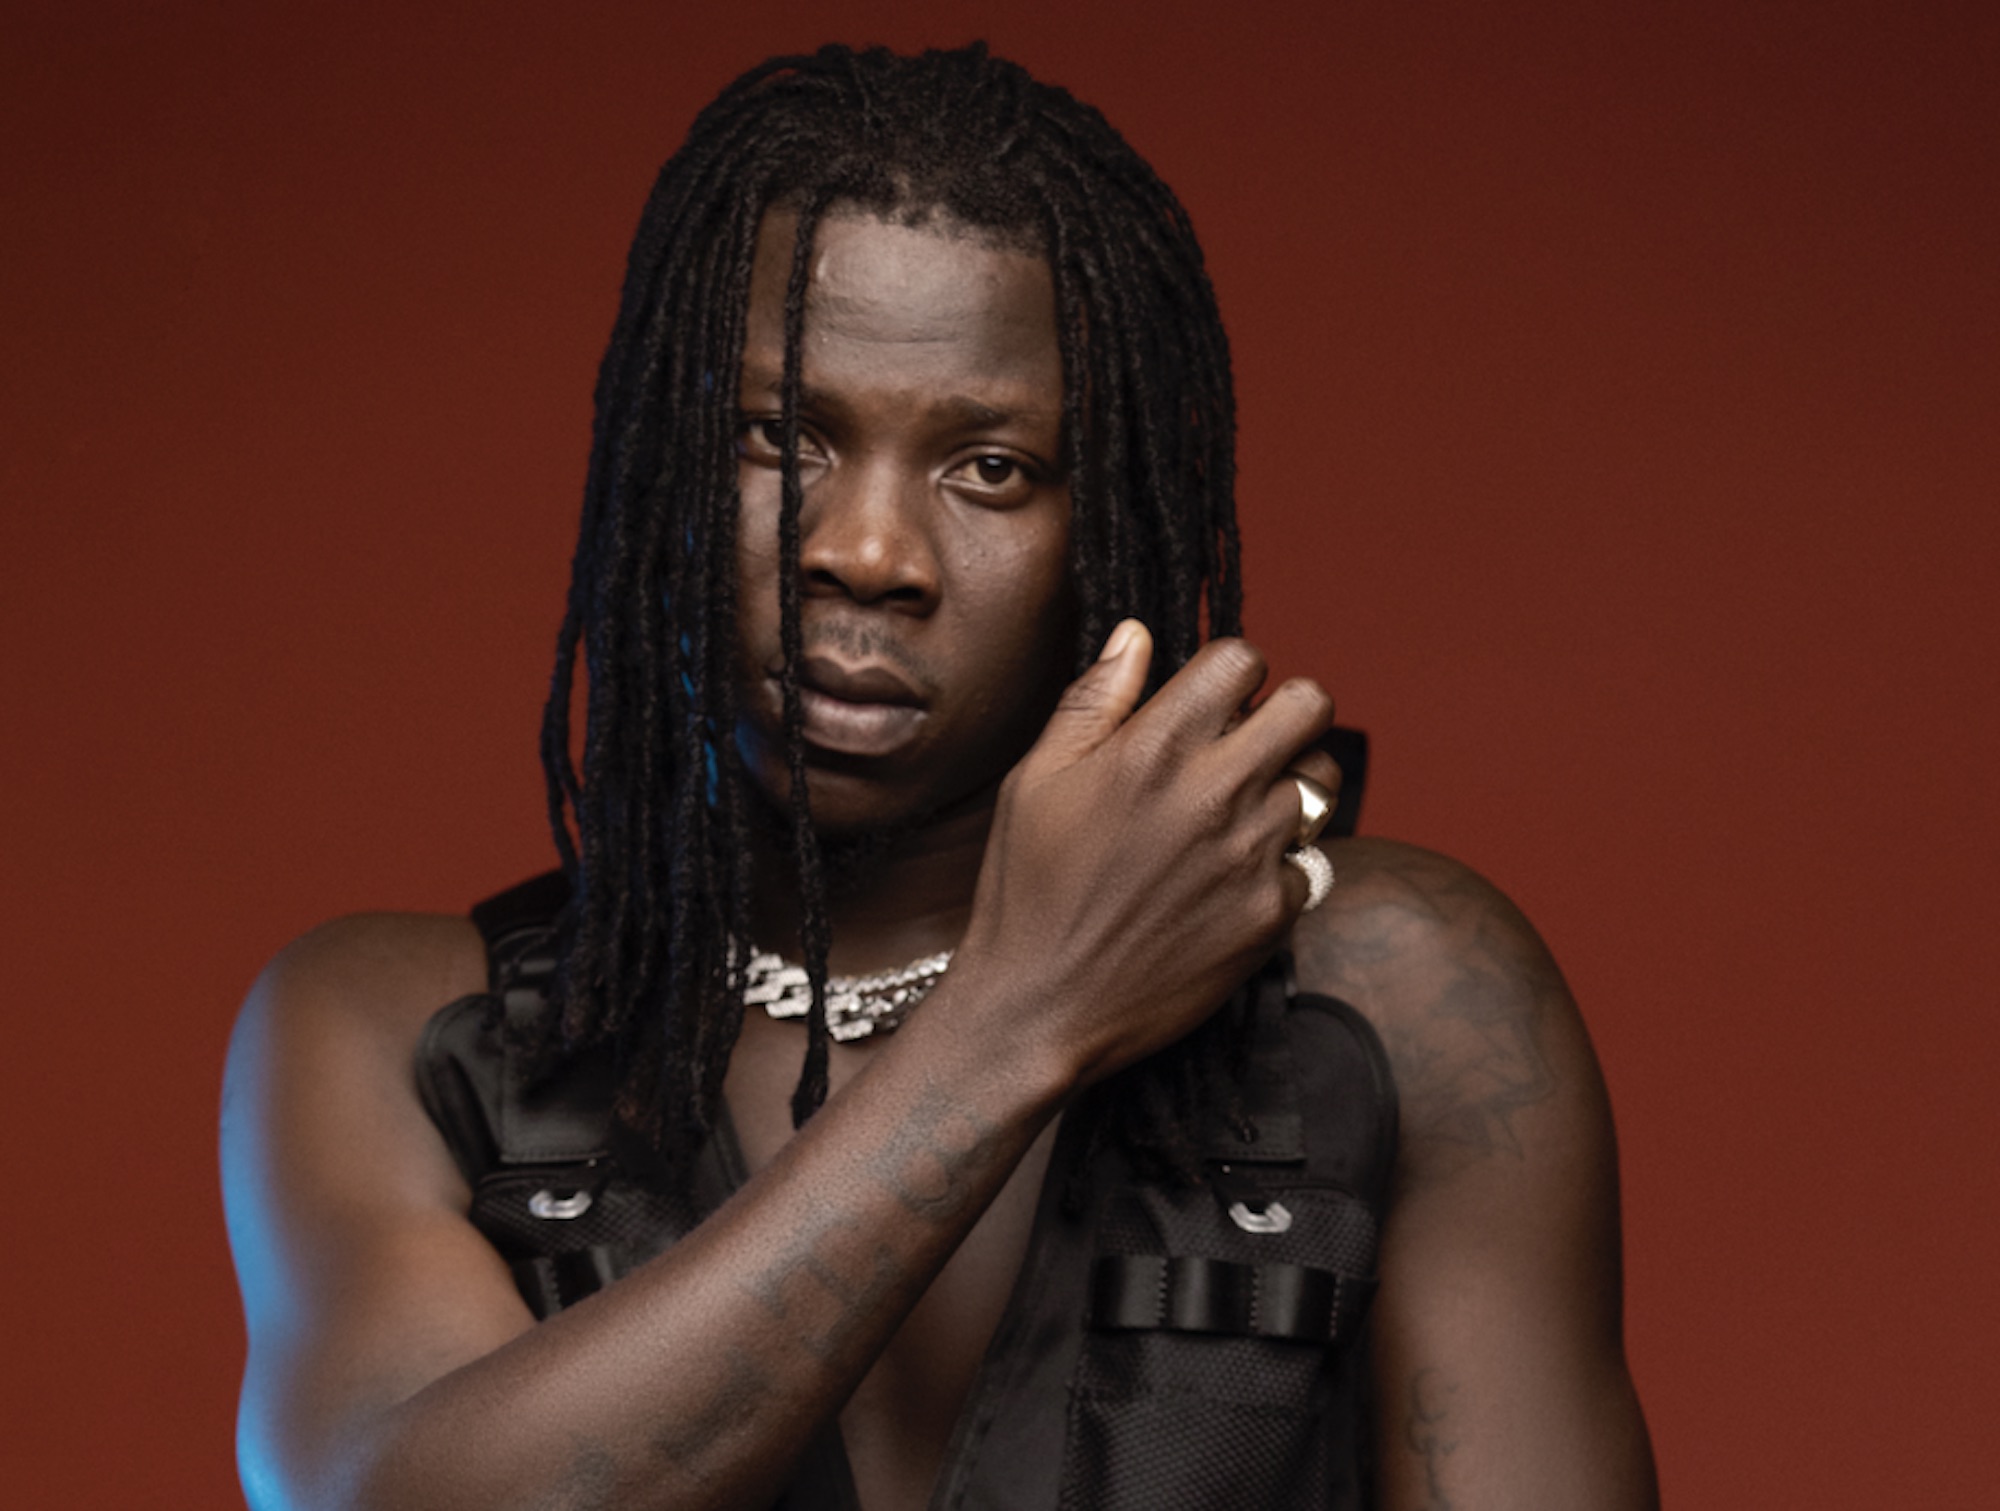 Stonebwoy Returns To VGMA After Banned For Two Years